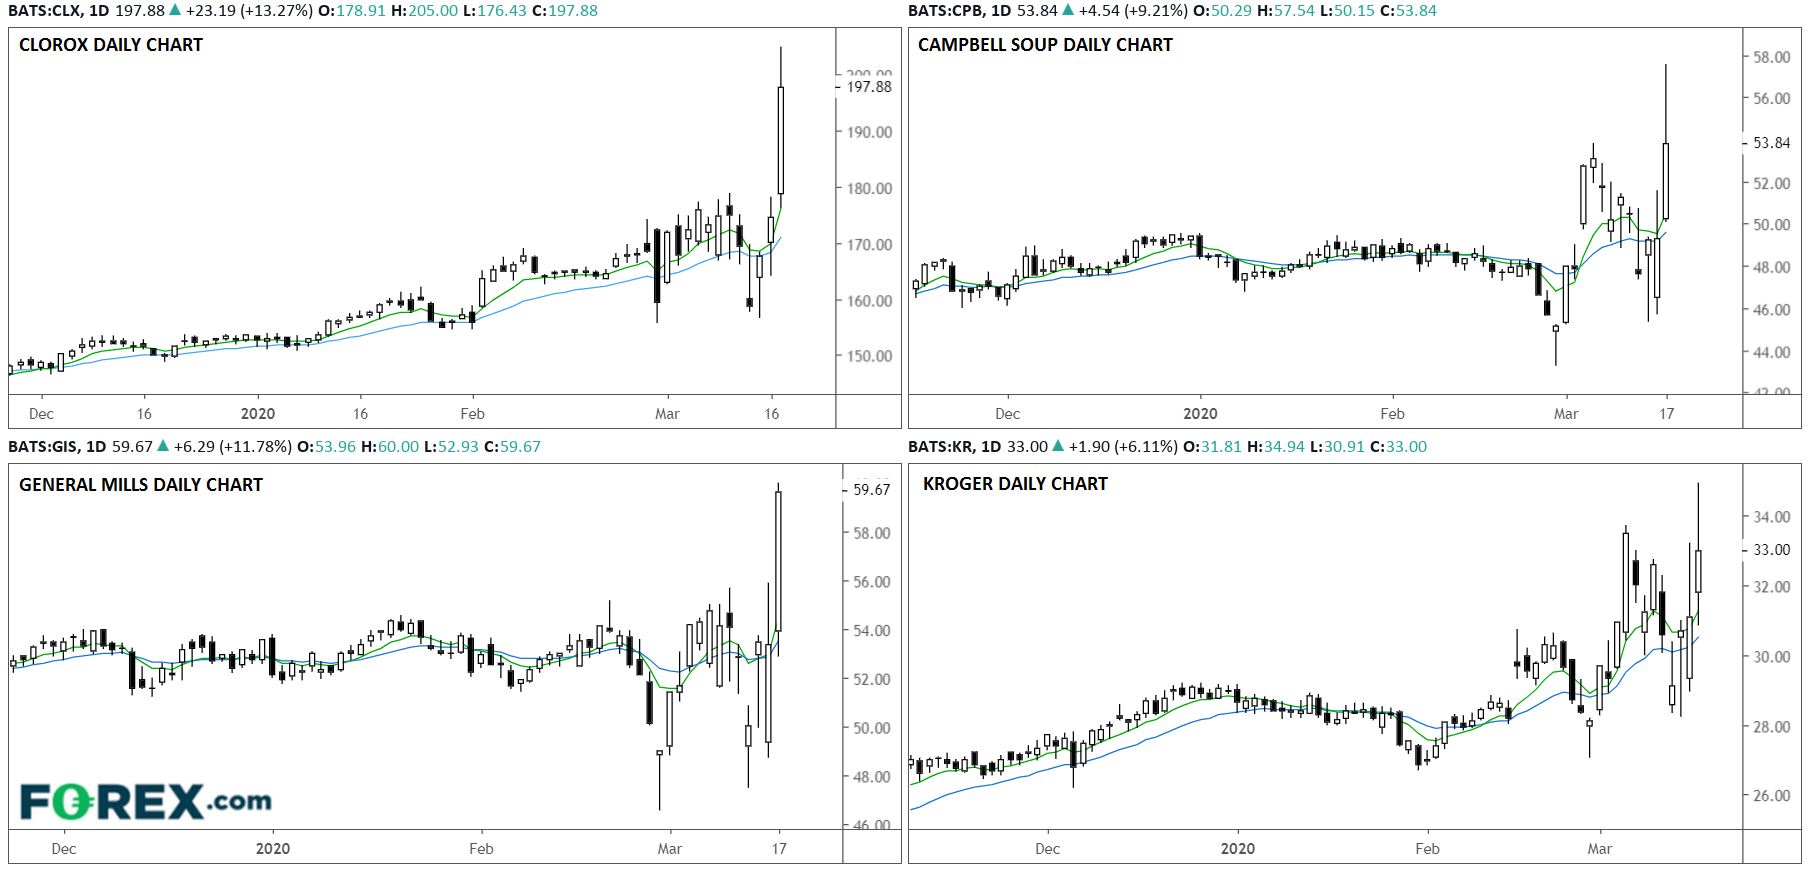 Chart analysis comparing Clorox, Campbell Soup, General Mills and Kroger performance. Published in March 2020 by FOREX.com